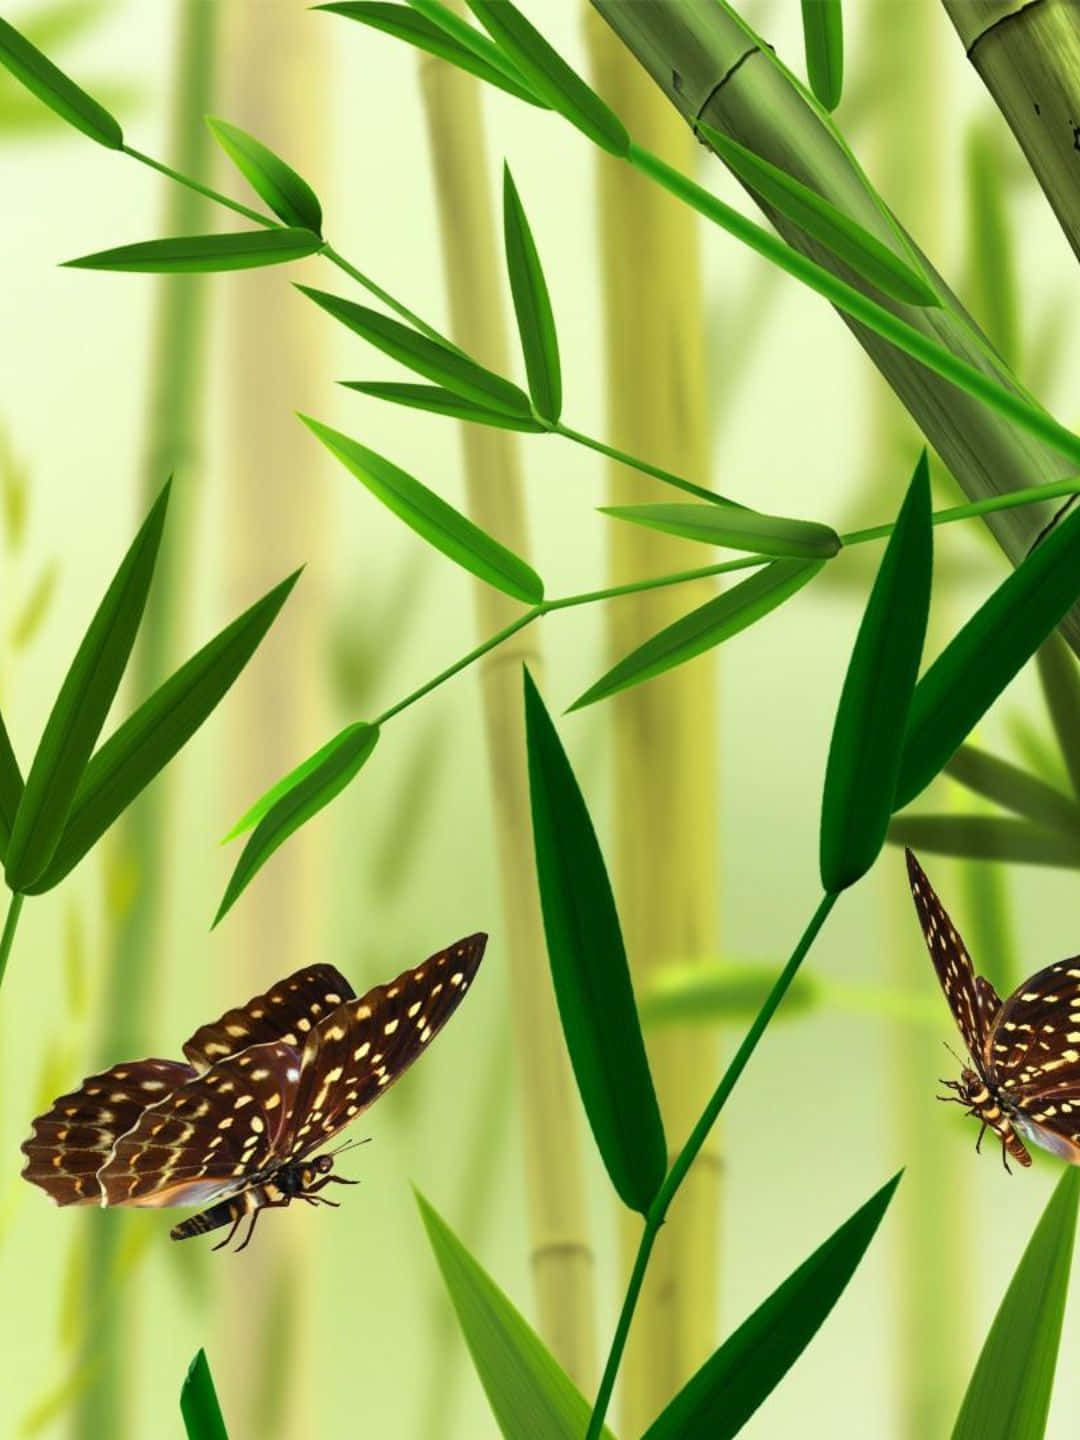 1440p Bamboo Background Leaves With Flying Butterflies